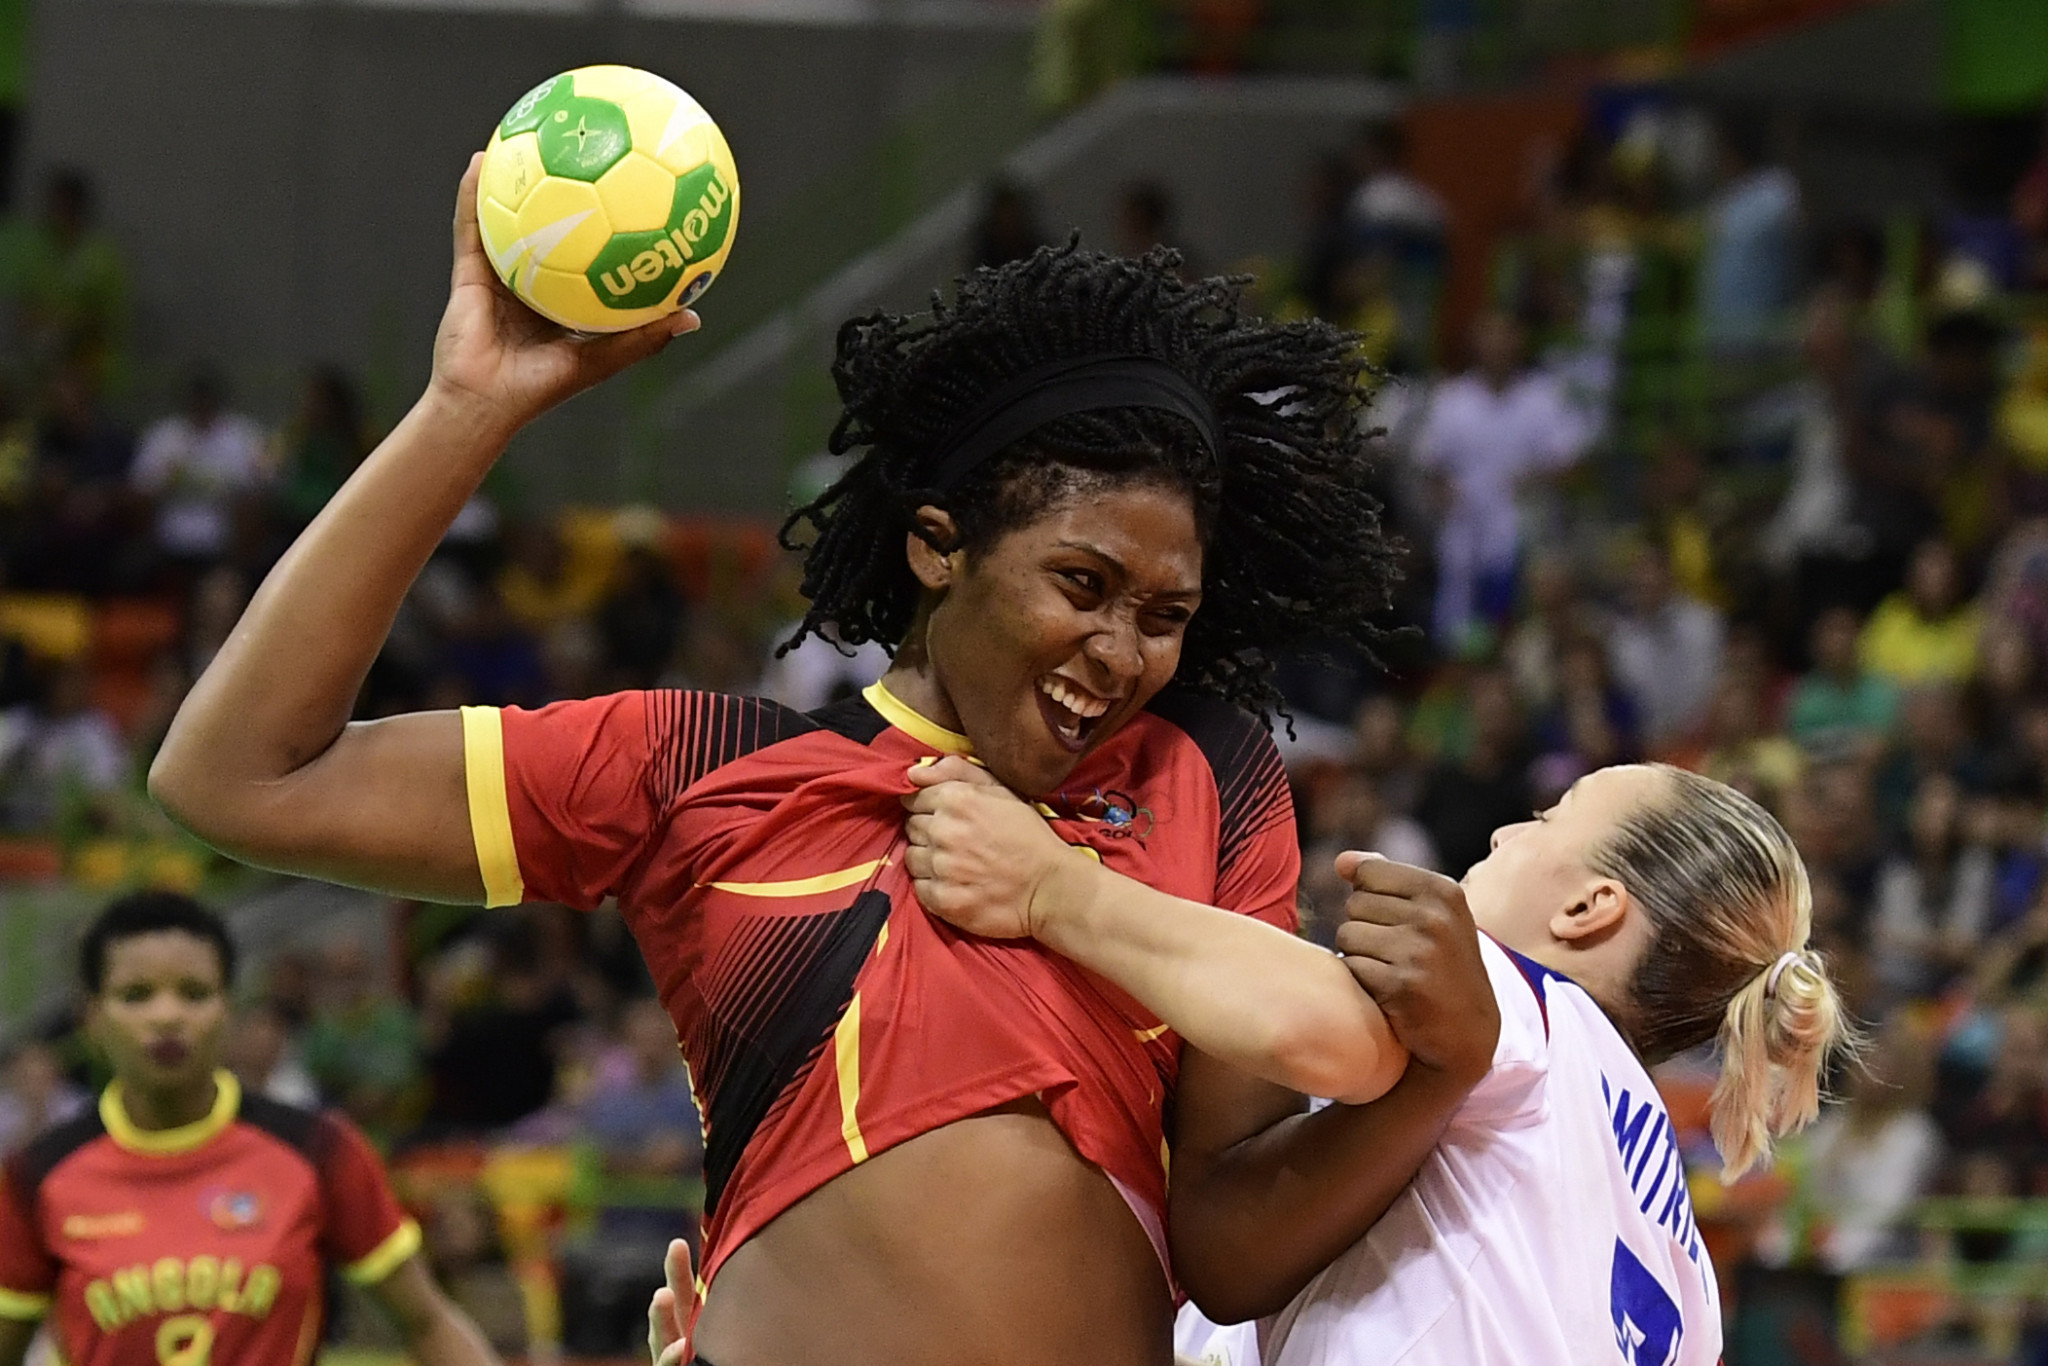 Angola's women's handball team have qualified for Tokyo 2020, where they will look to build on their quarter-final appearance at Rio 2016 when they lost to Russia ©Getty Images